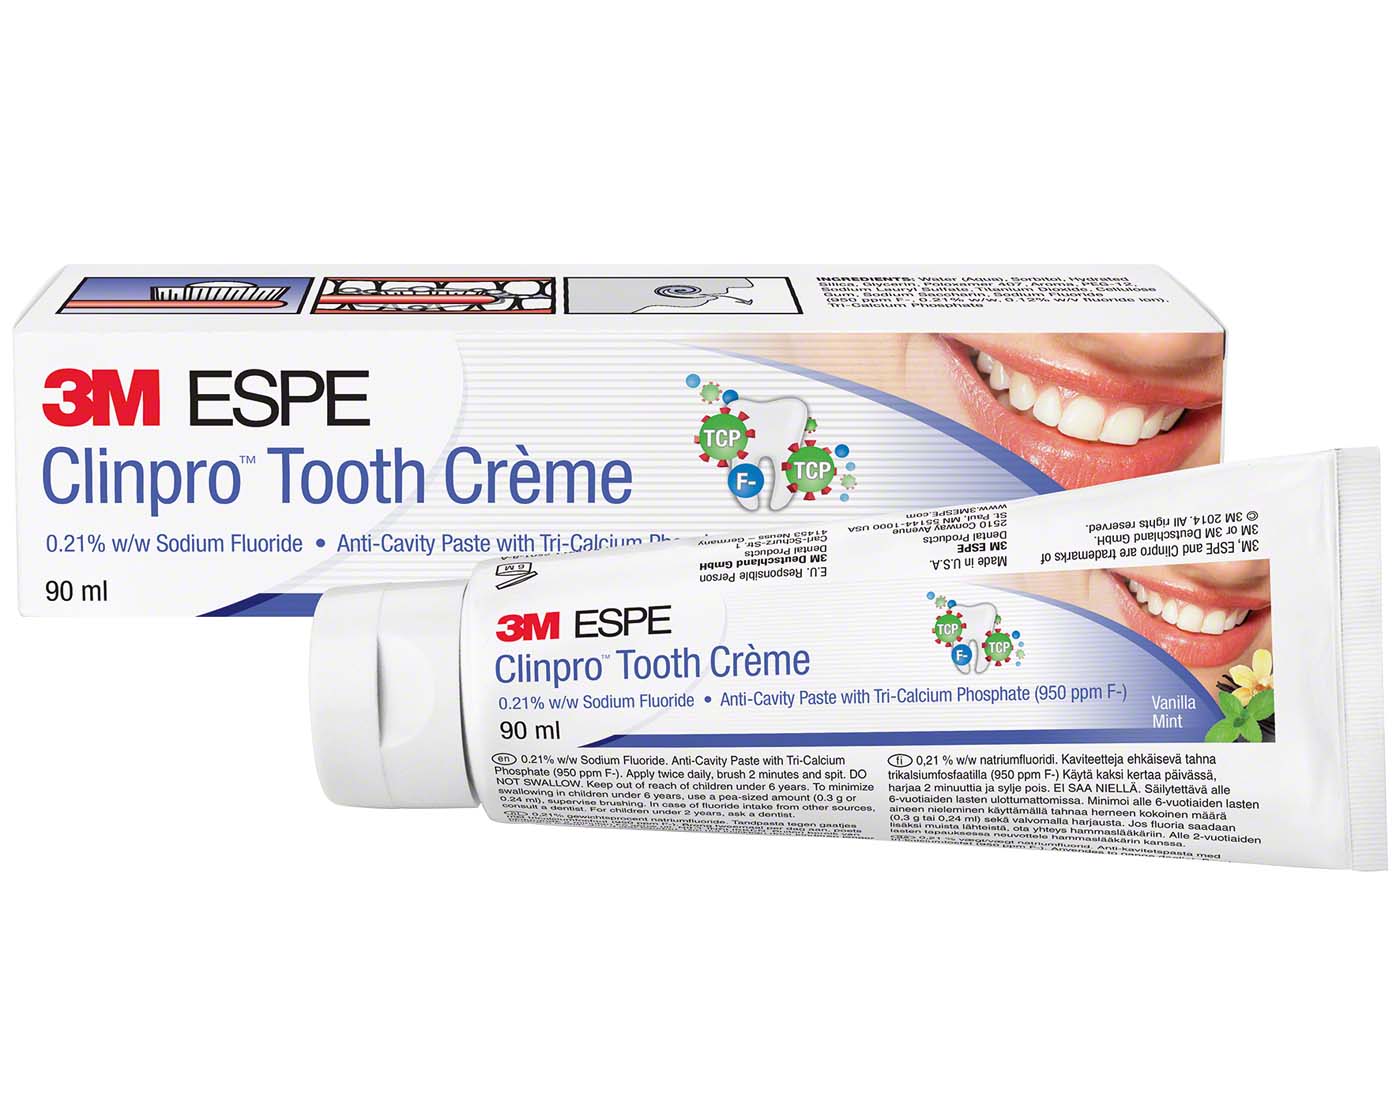 Clinpro™ Tooth Creme 3M